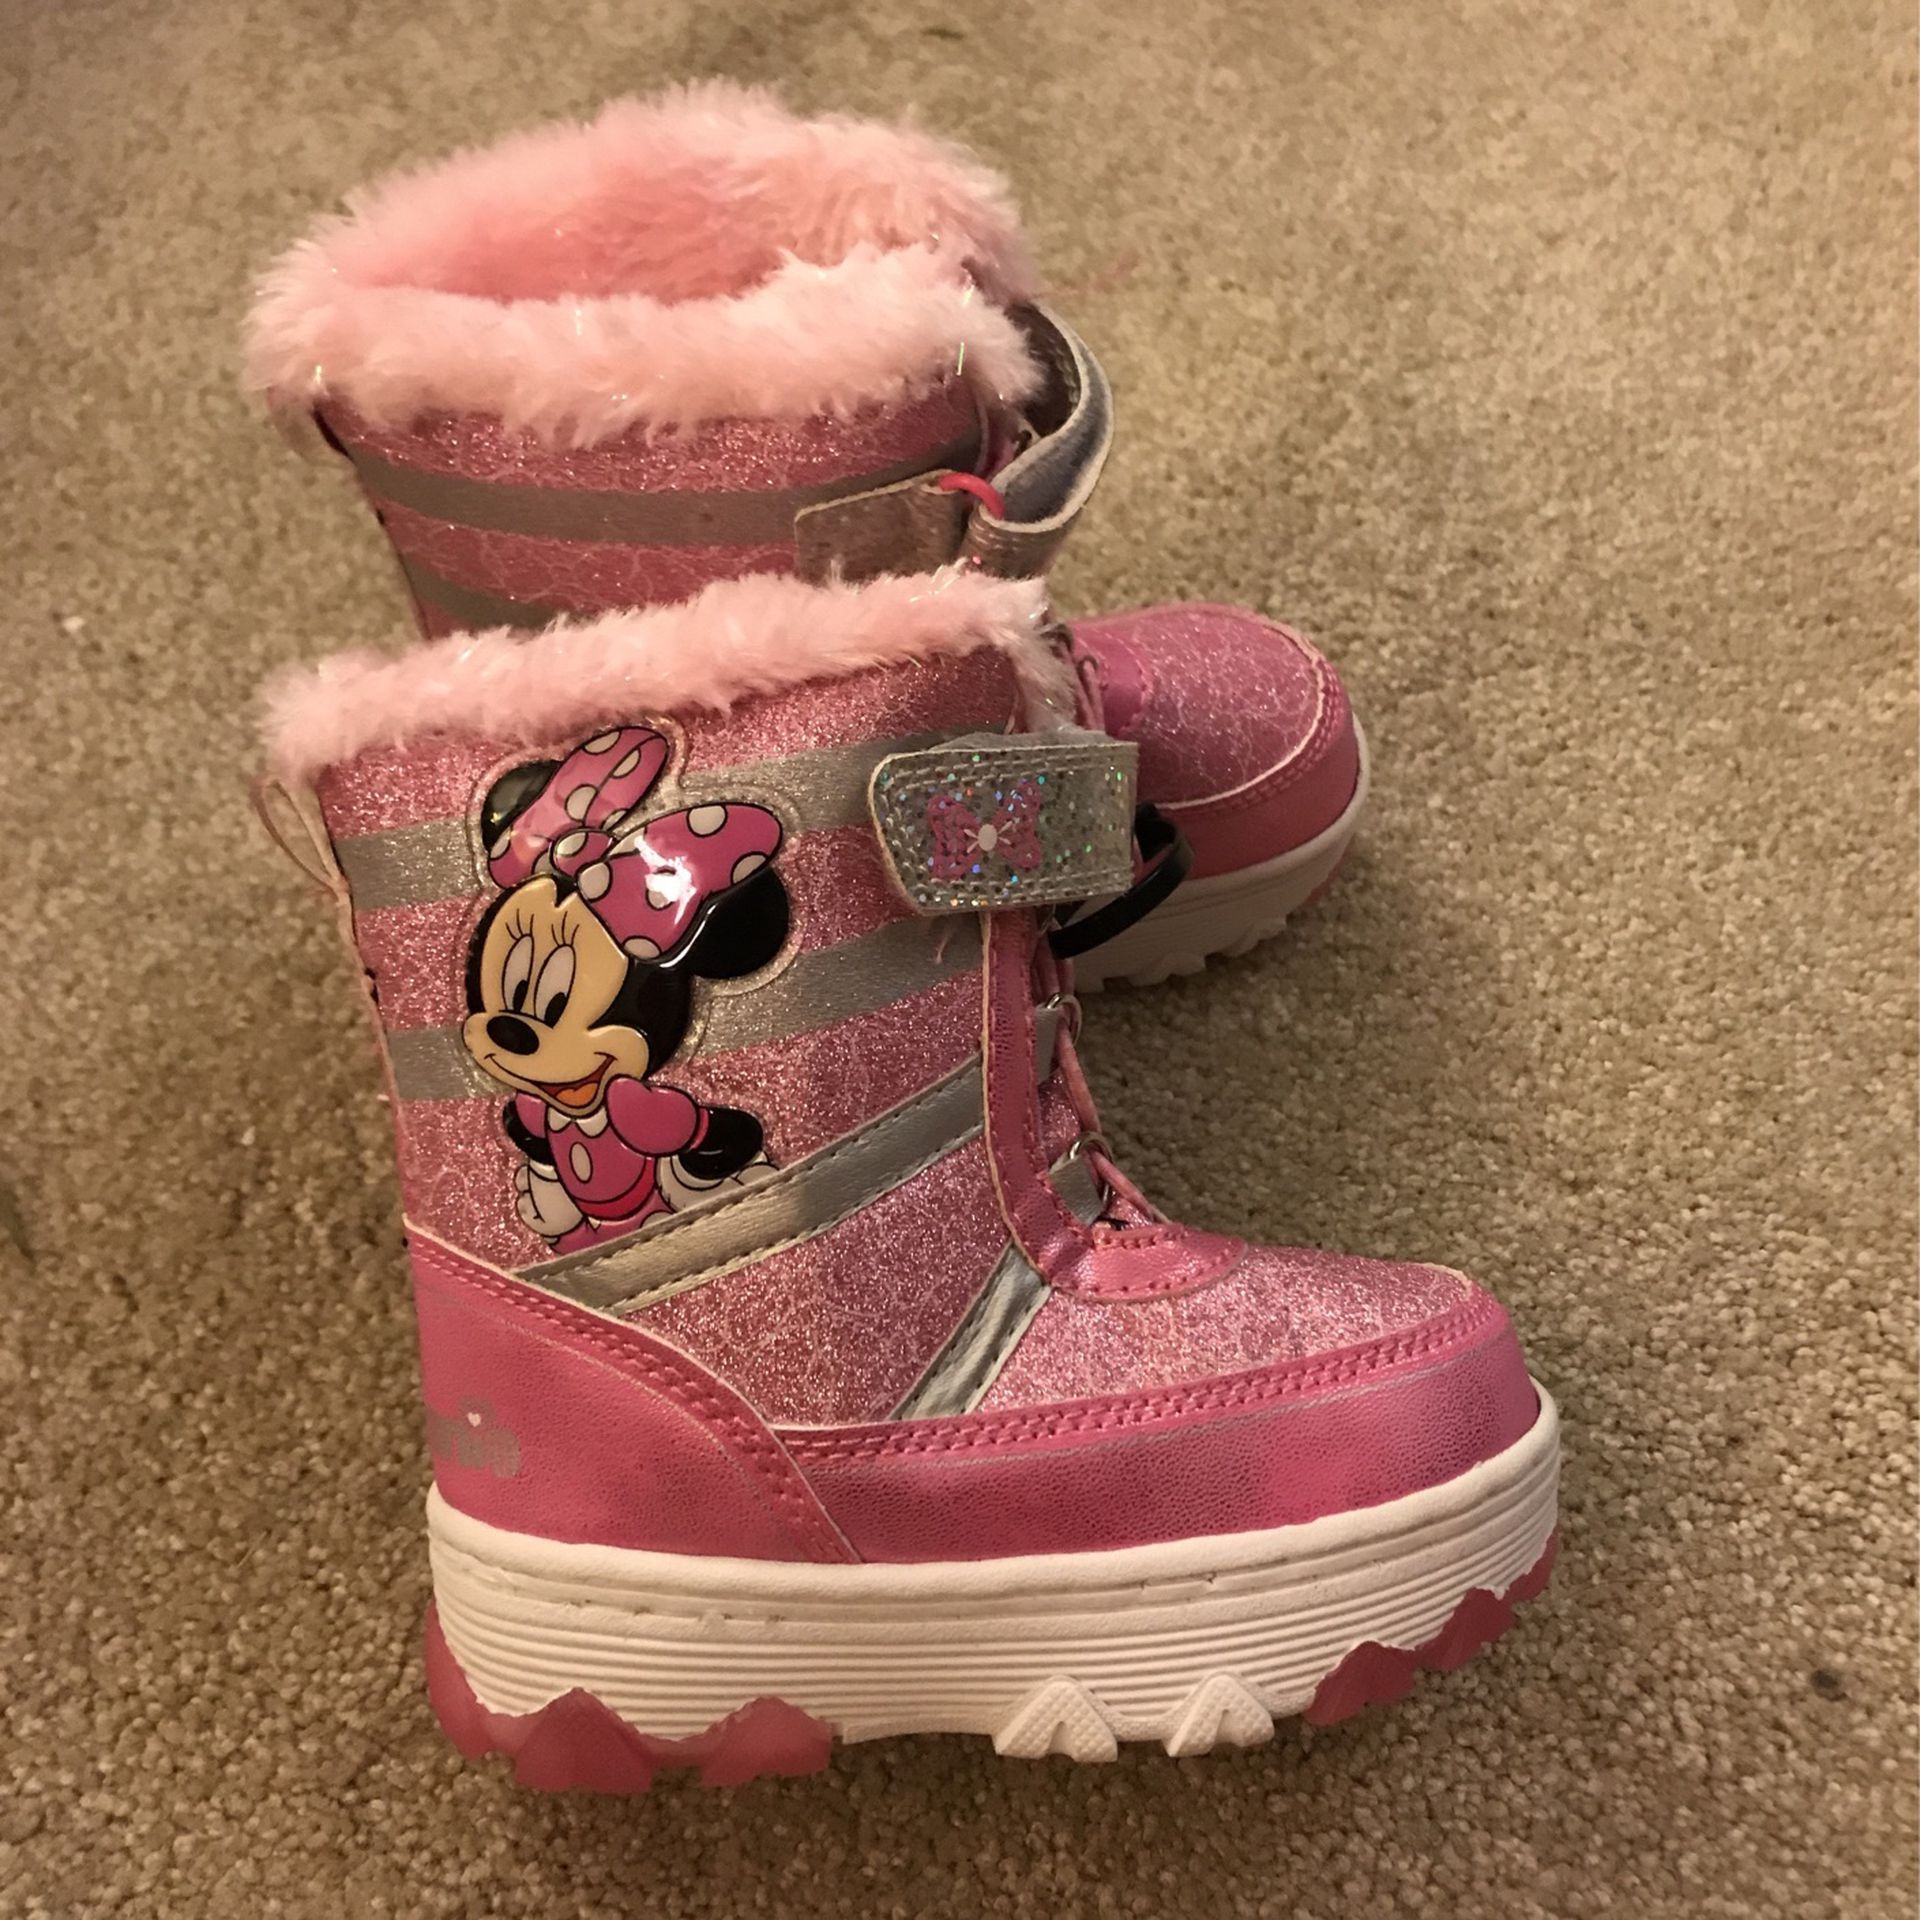 Brand New Minnie Mouse Light Up Snow Boots